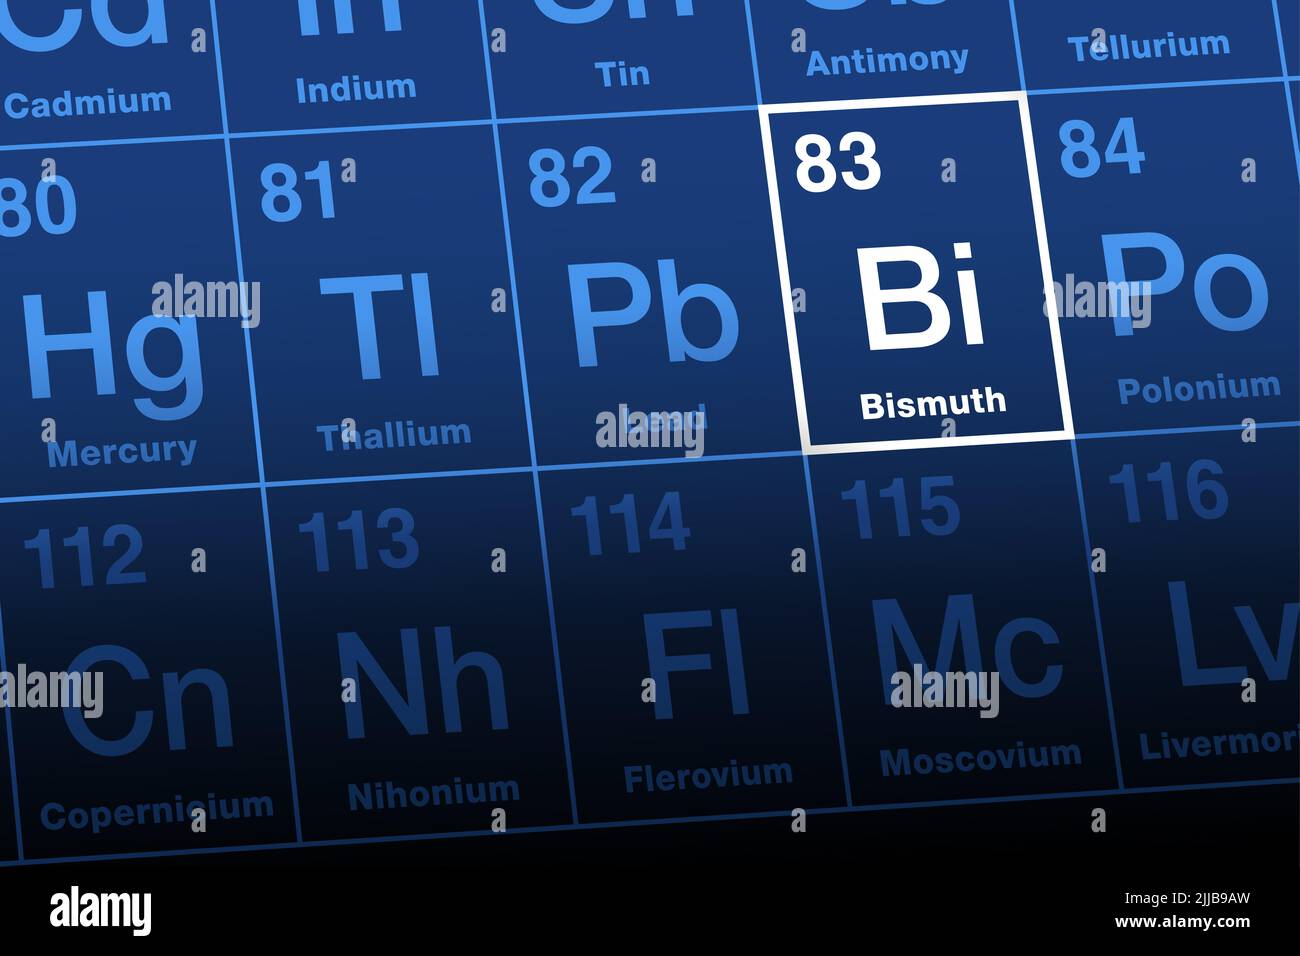 Bismuth on periodic table. Radioactive post-transition metal and chemical element with symbol Bi, possibly from the obsolete German Wismut. Stock Photo